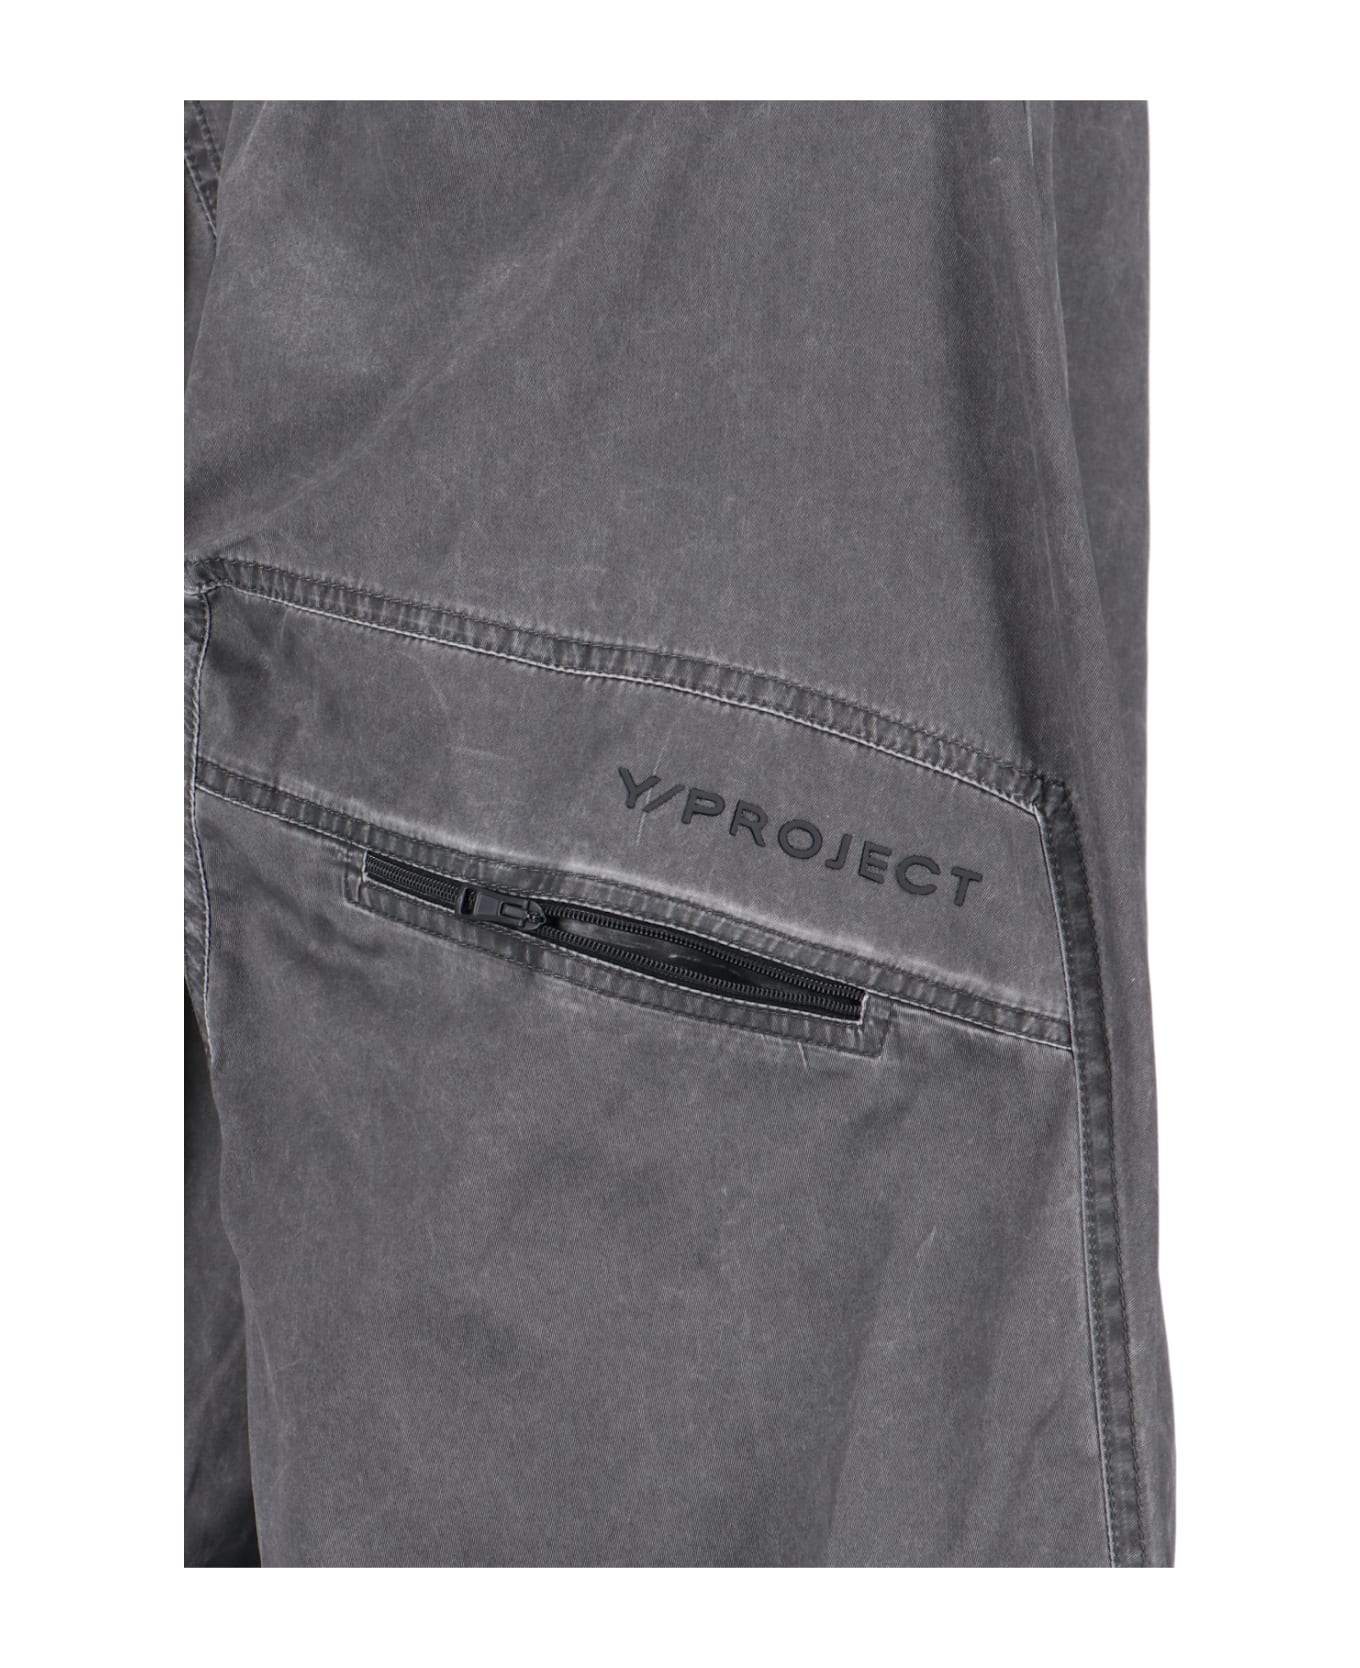 Y/Project Cargo Trousers - Black   name:467